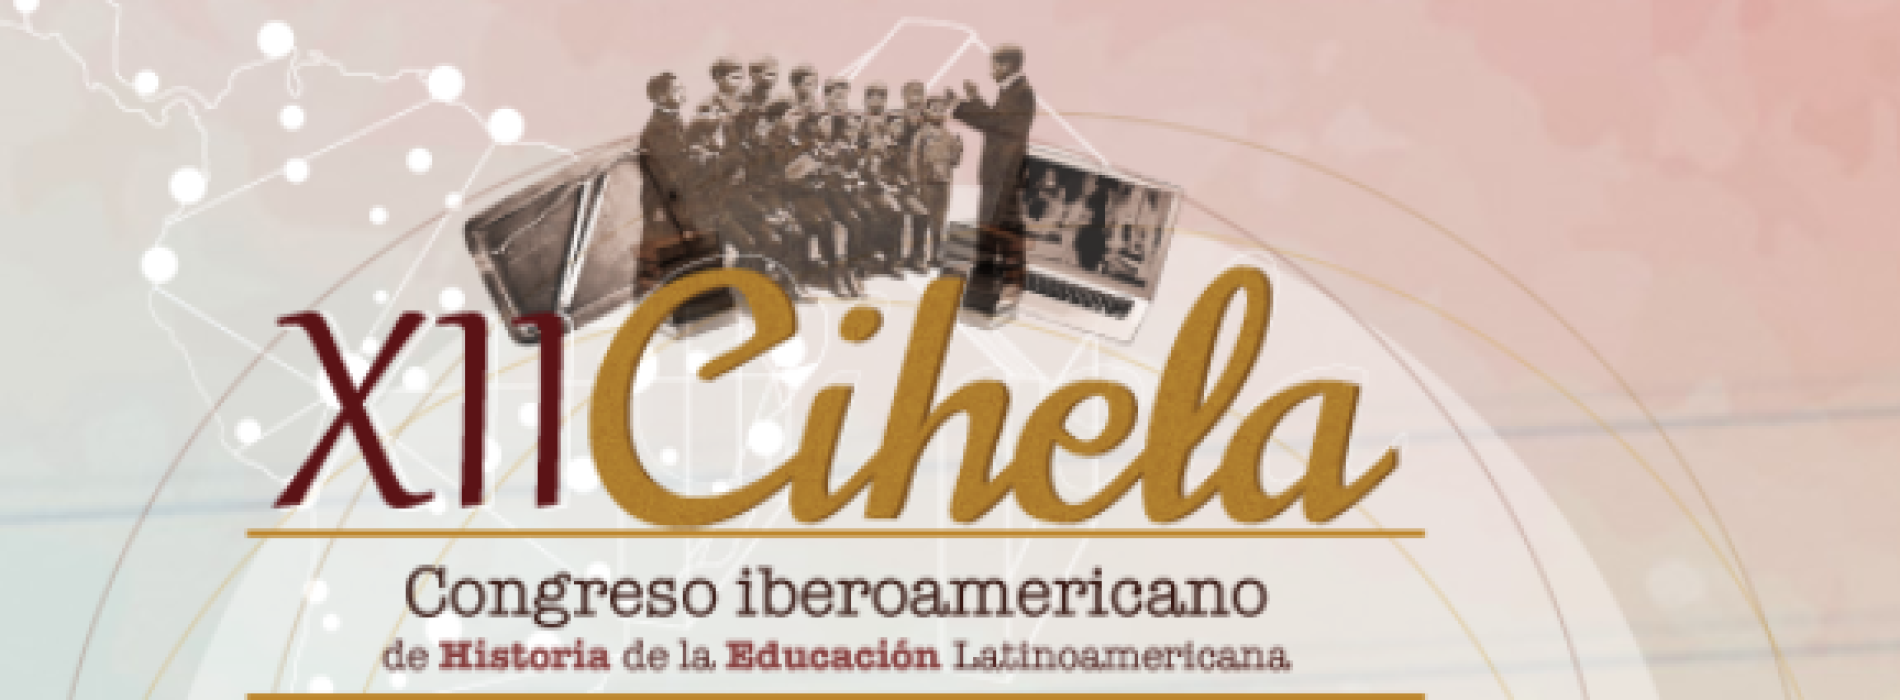 Call for Papers: CIHELA 15-18 March 2016 (Medellin, Colombia)